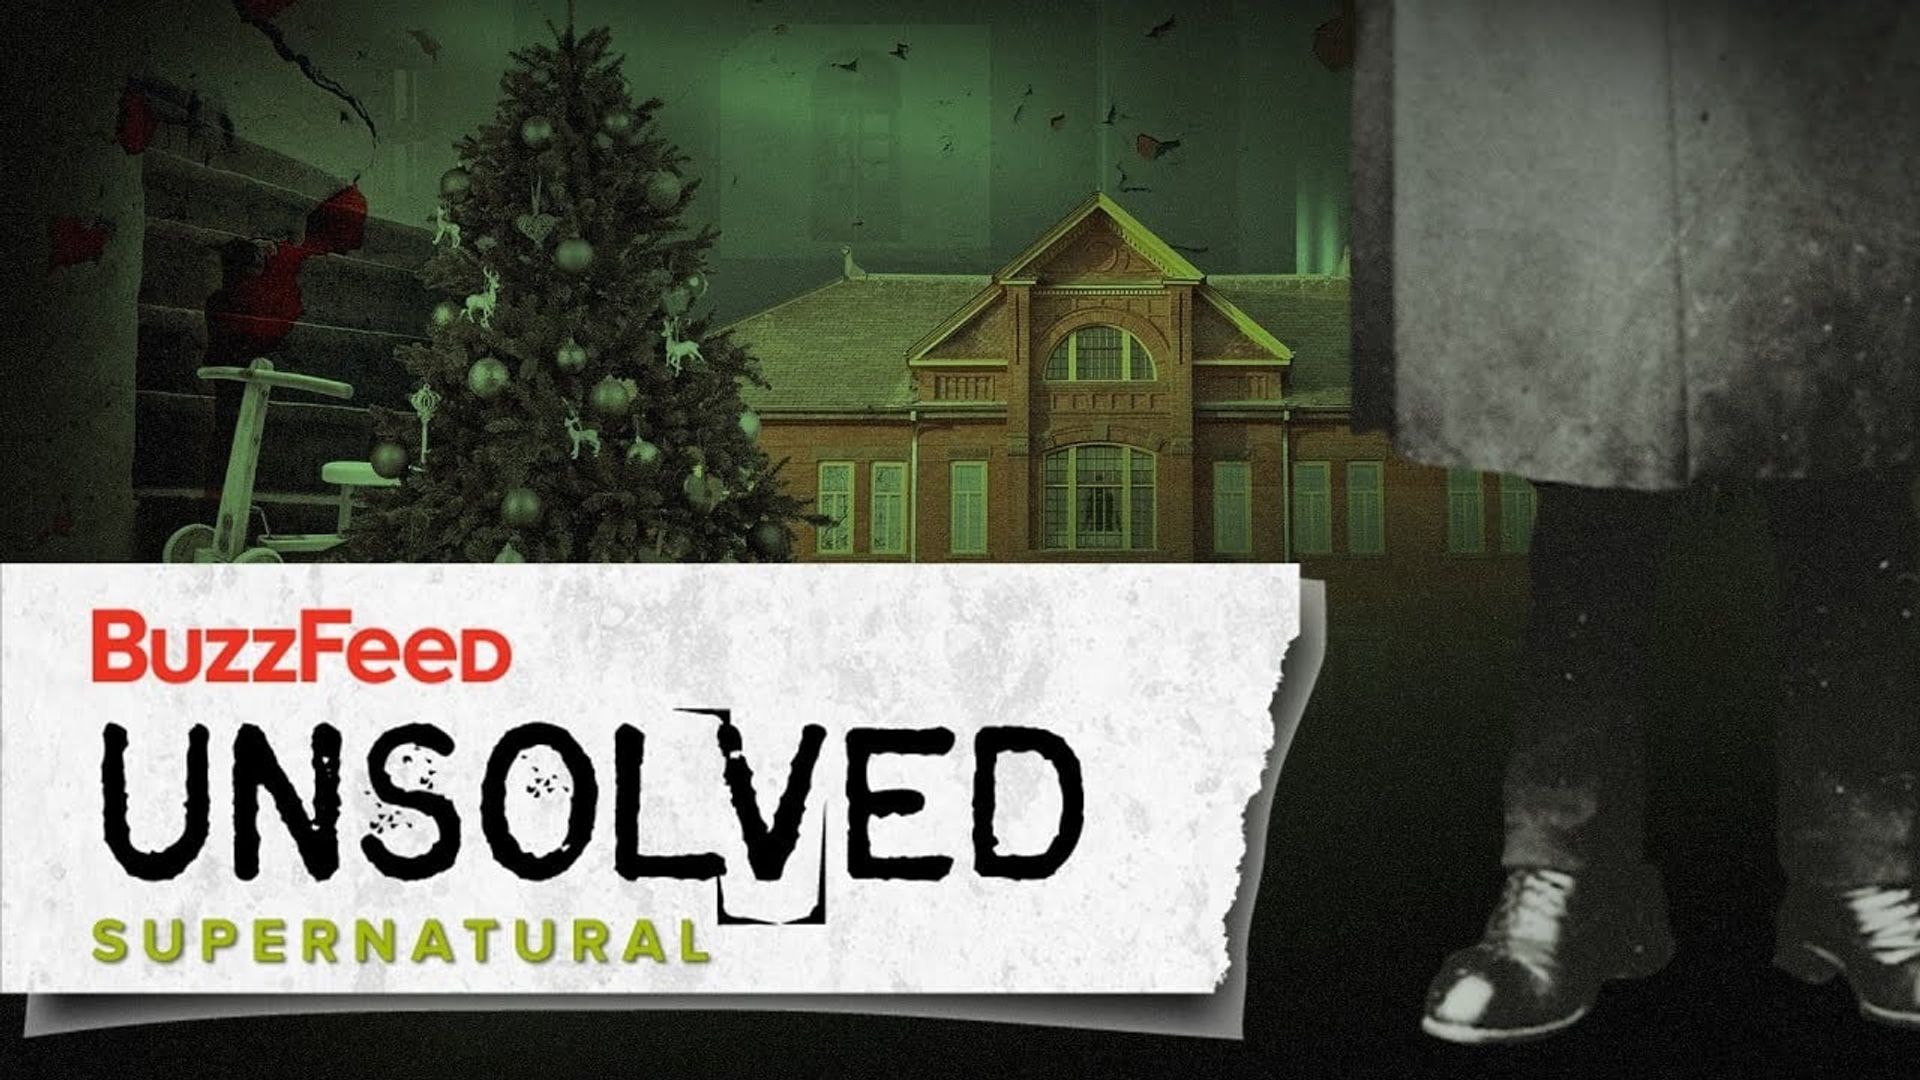 BuzzFeed Unsolved: Supernatural background